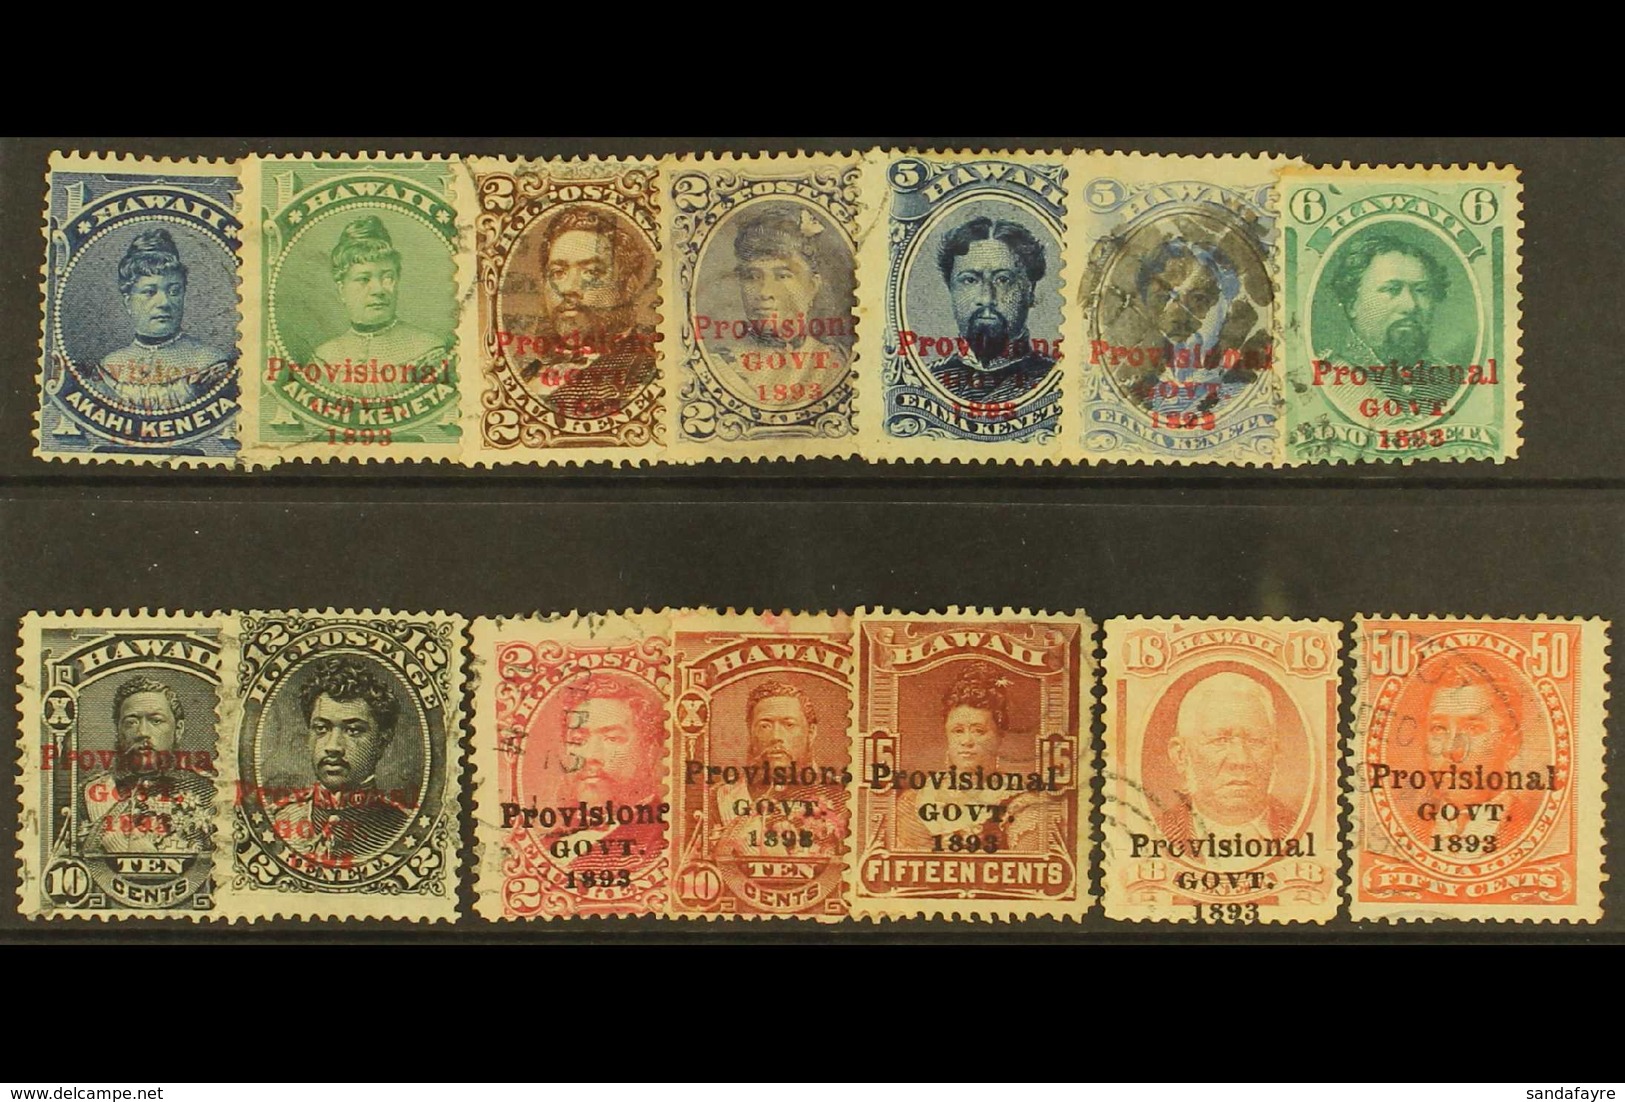 1893  "Provisional GOVT." Overprints, Incl. Red Ovpts From 1c Blue To 10c Black & 12c Black, Black Ovpts 2c Rose, 10c Re - Hawaii